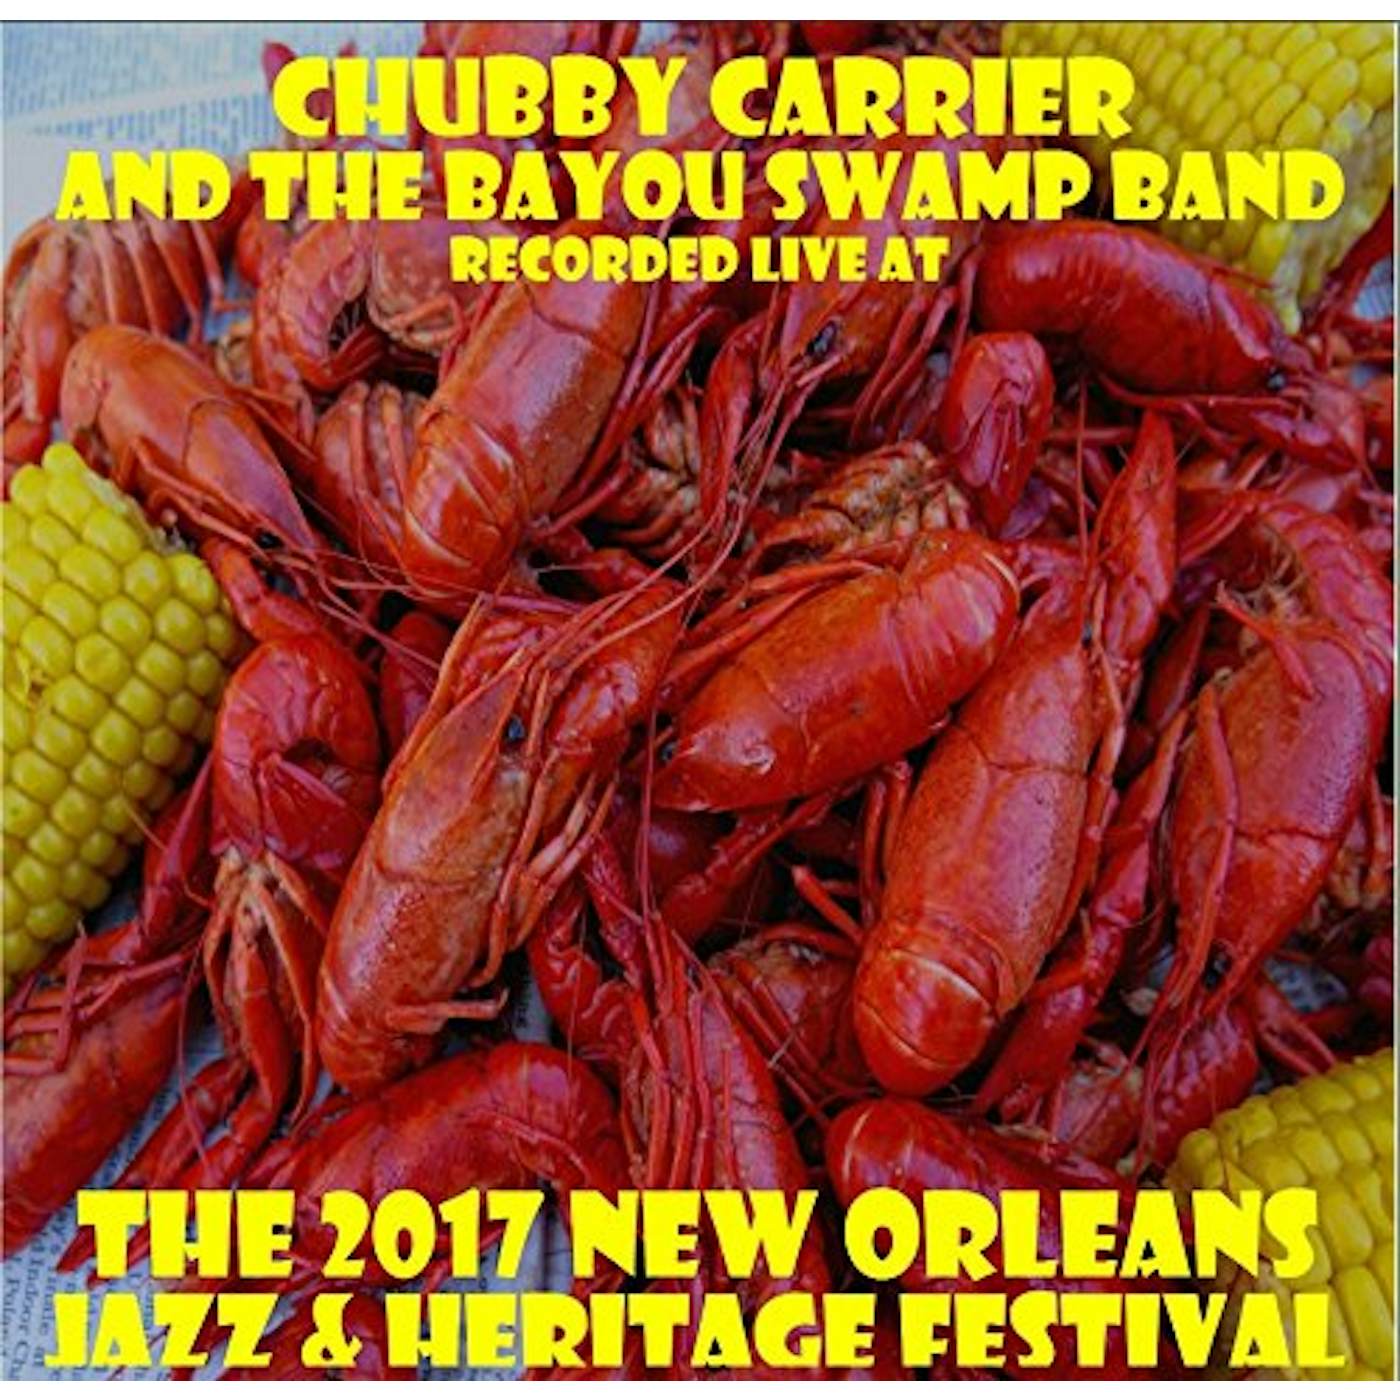 Chubby Carrier LIVE AT JAZZFEST 2017 CD